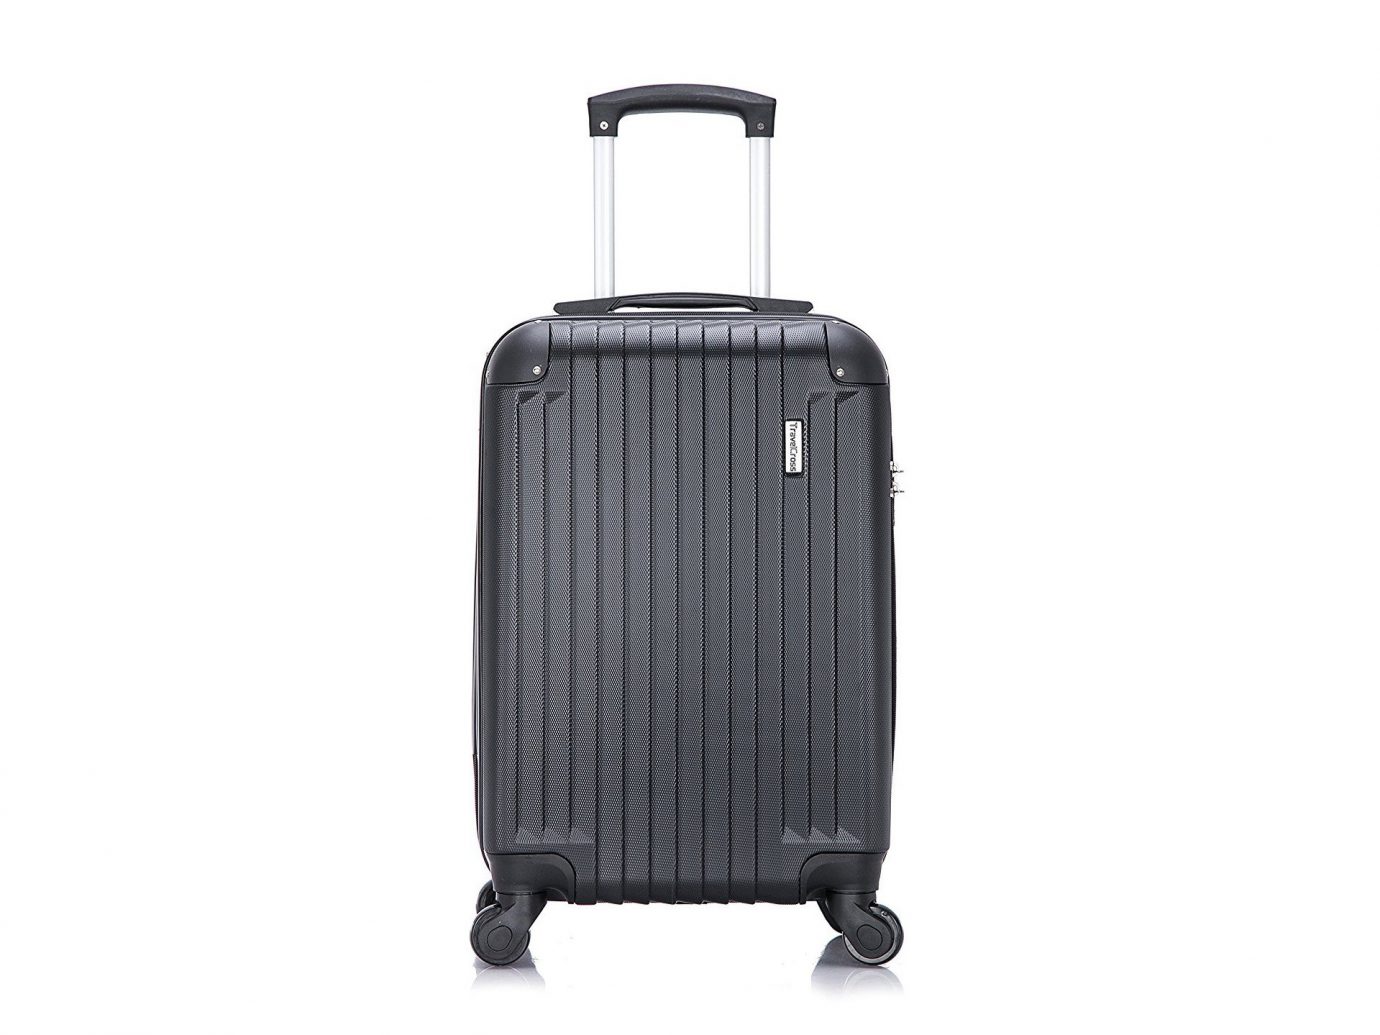 Travel Tips luggage suitcase piece bag product black hand luggage case luggage & bags product design baggage stack